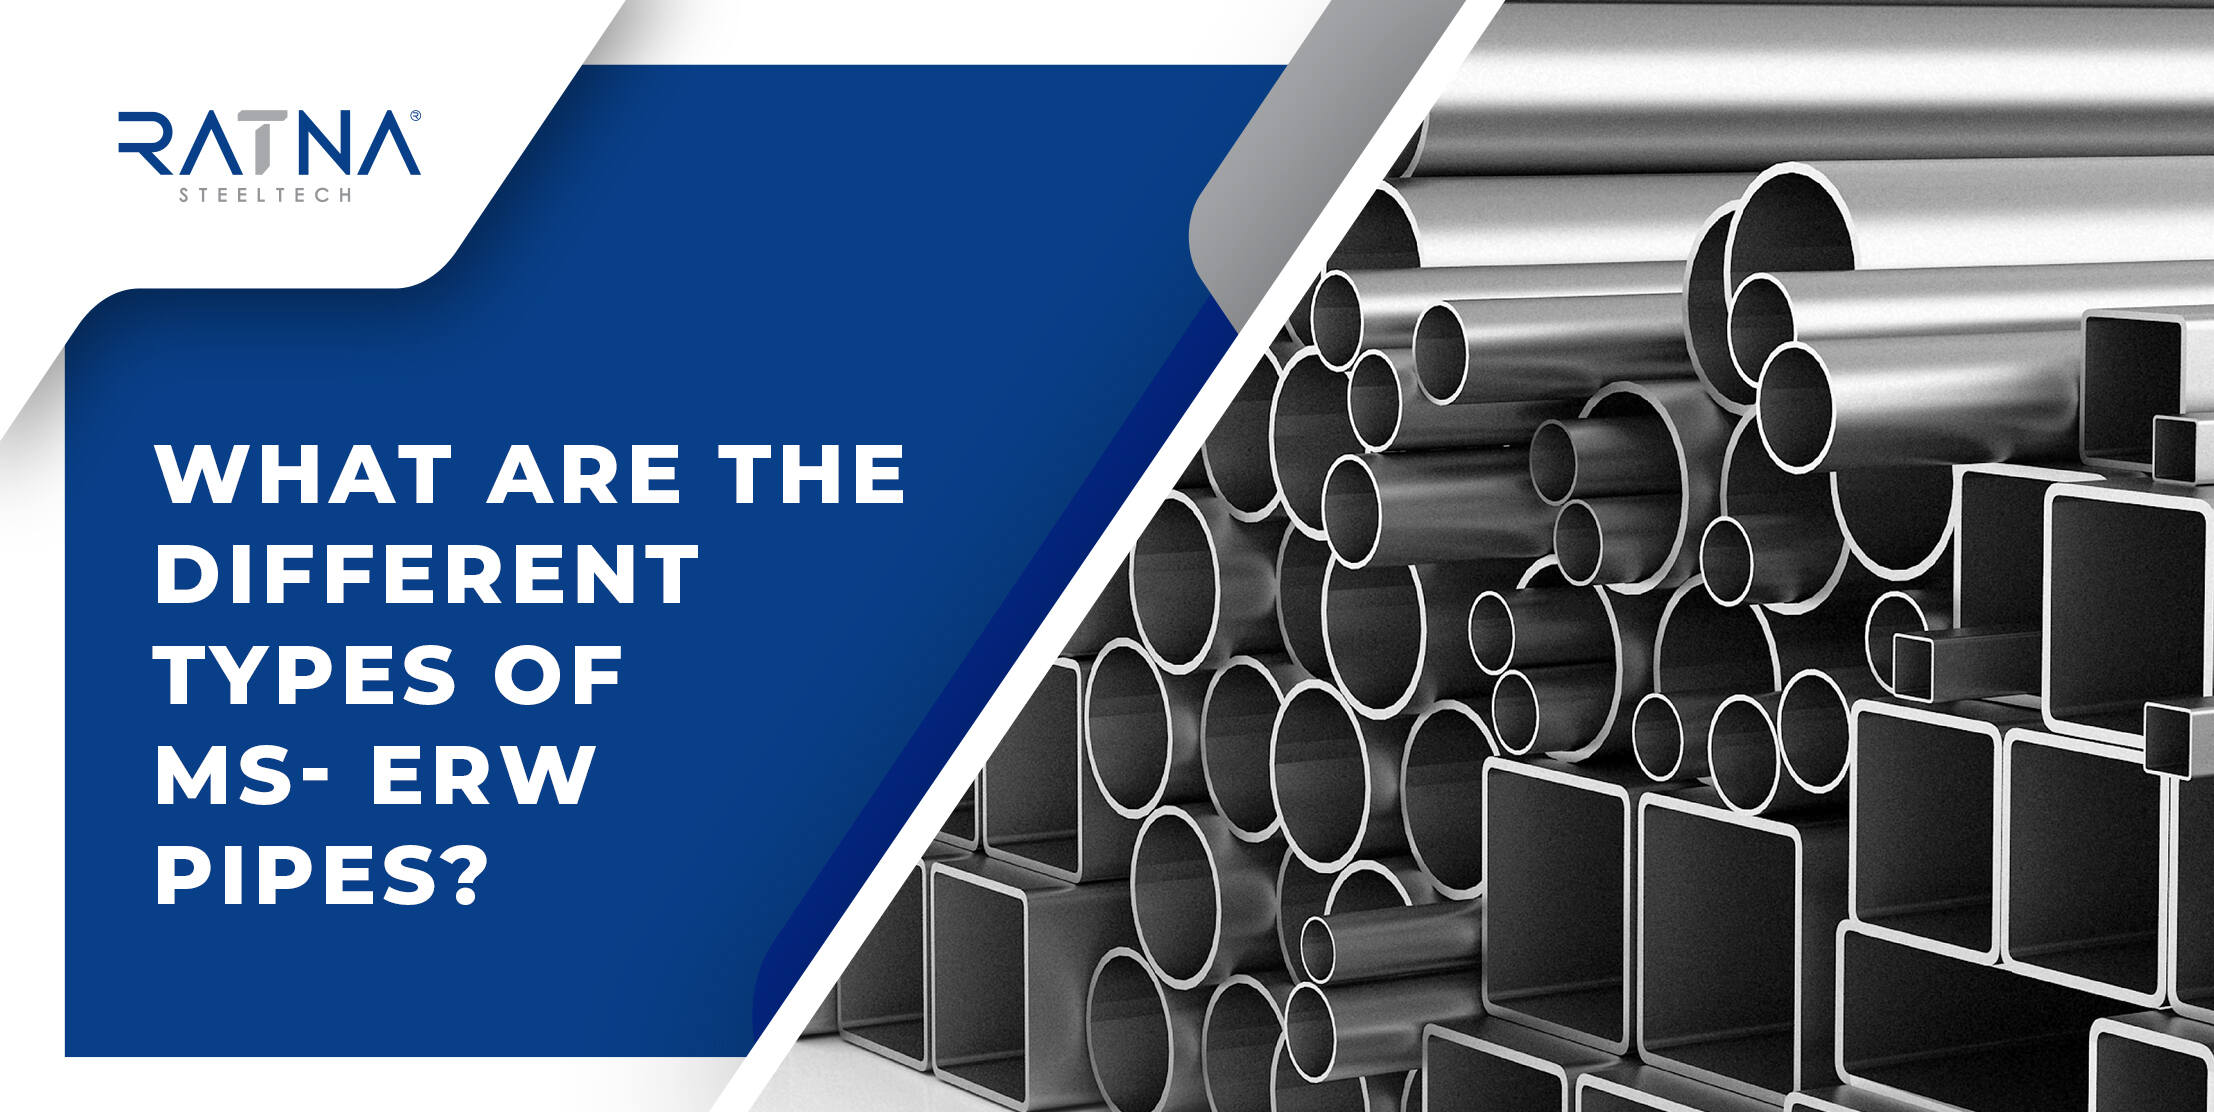 What are the Different types of MS-ERW pipes? - Ratna Steeltech